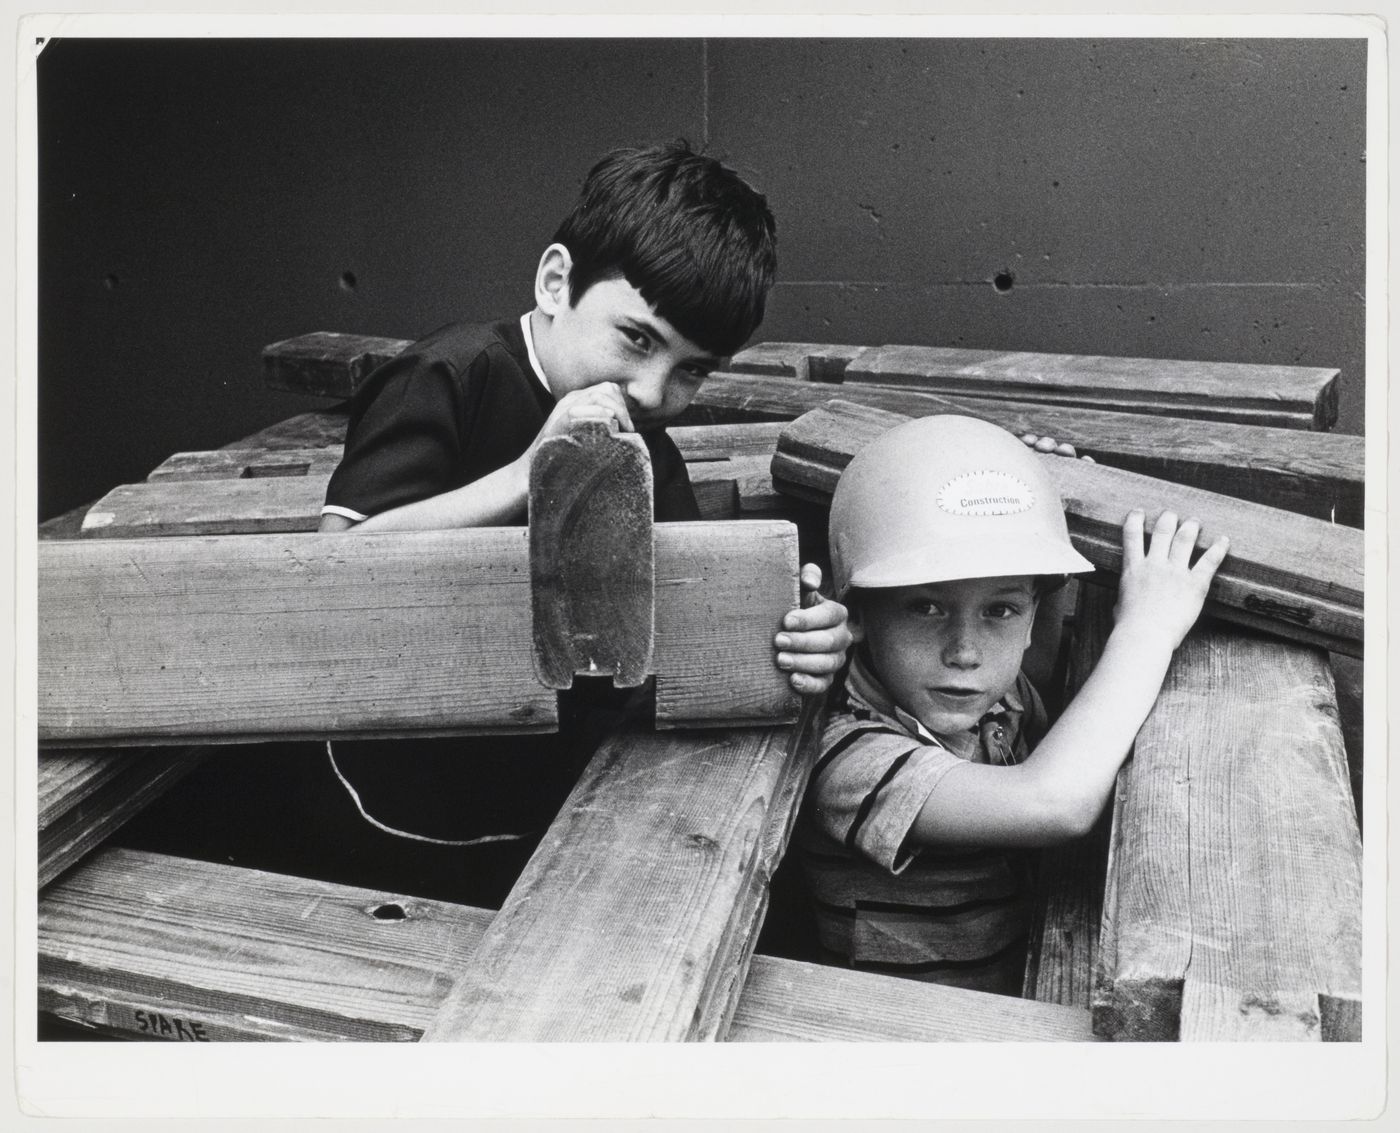 View of children playing at Children's Creative Centre Playground, Canadian Federal Pavilion, Expo '67, Montréal, Québec